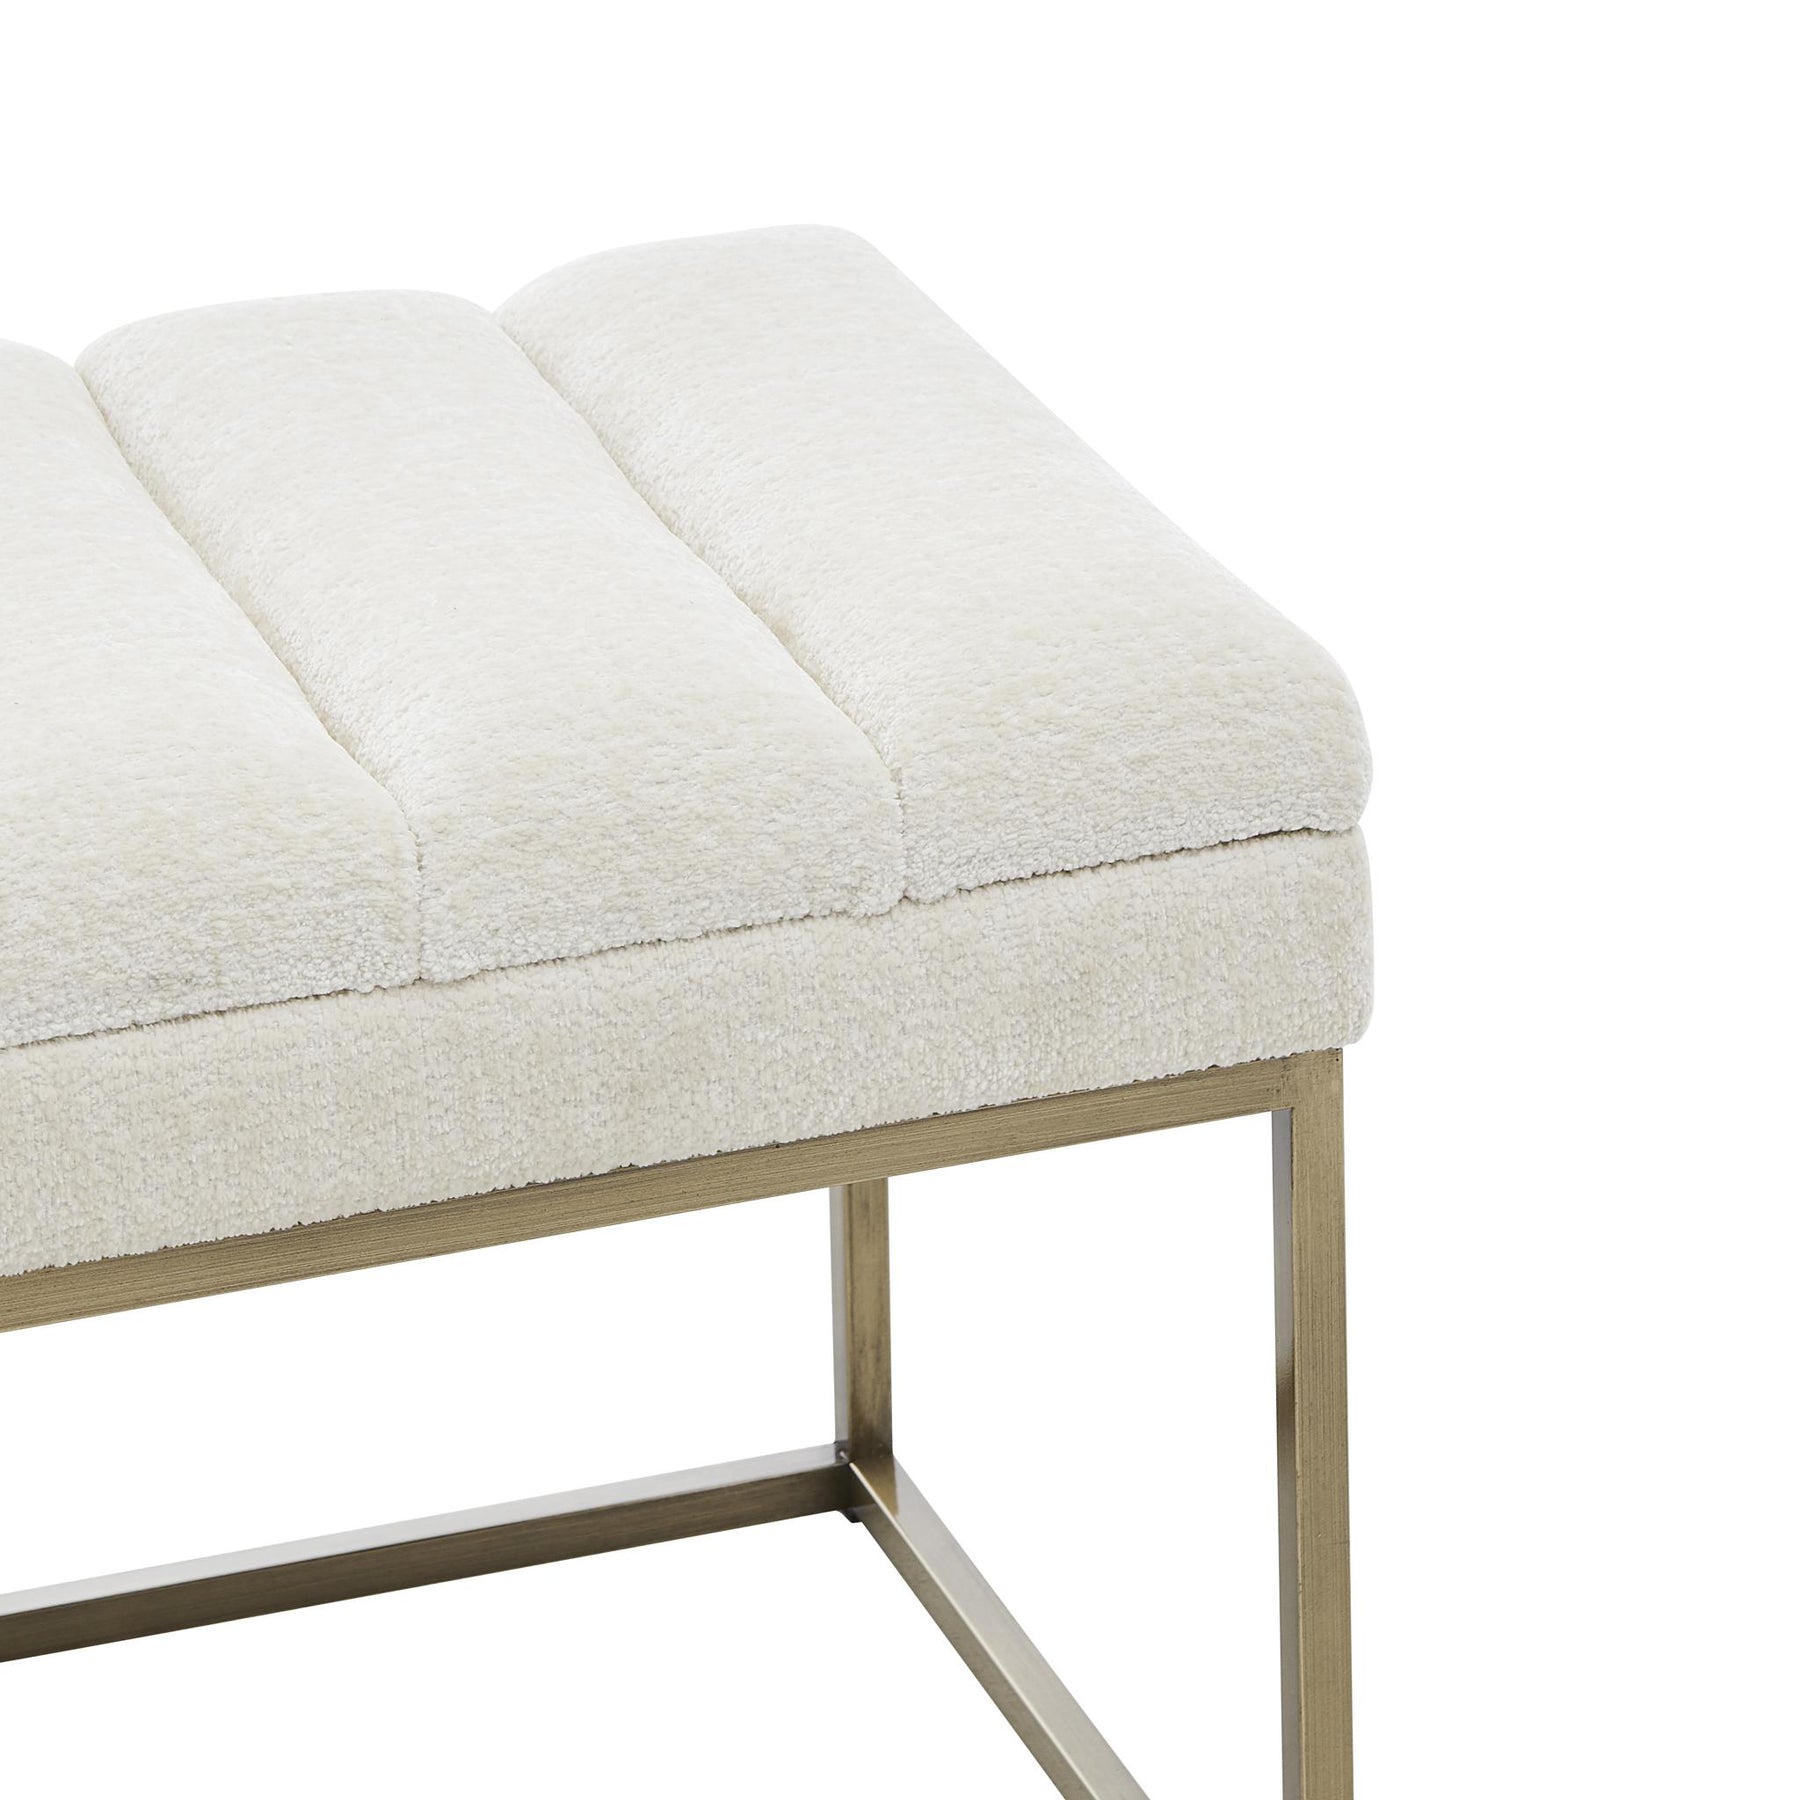 Darius KD Fabric Bench by New Pacific Direct - 1600080